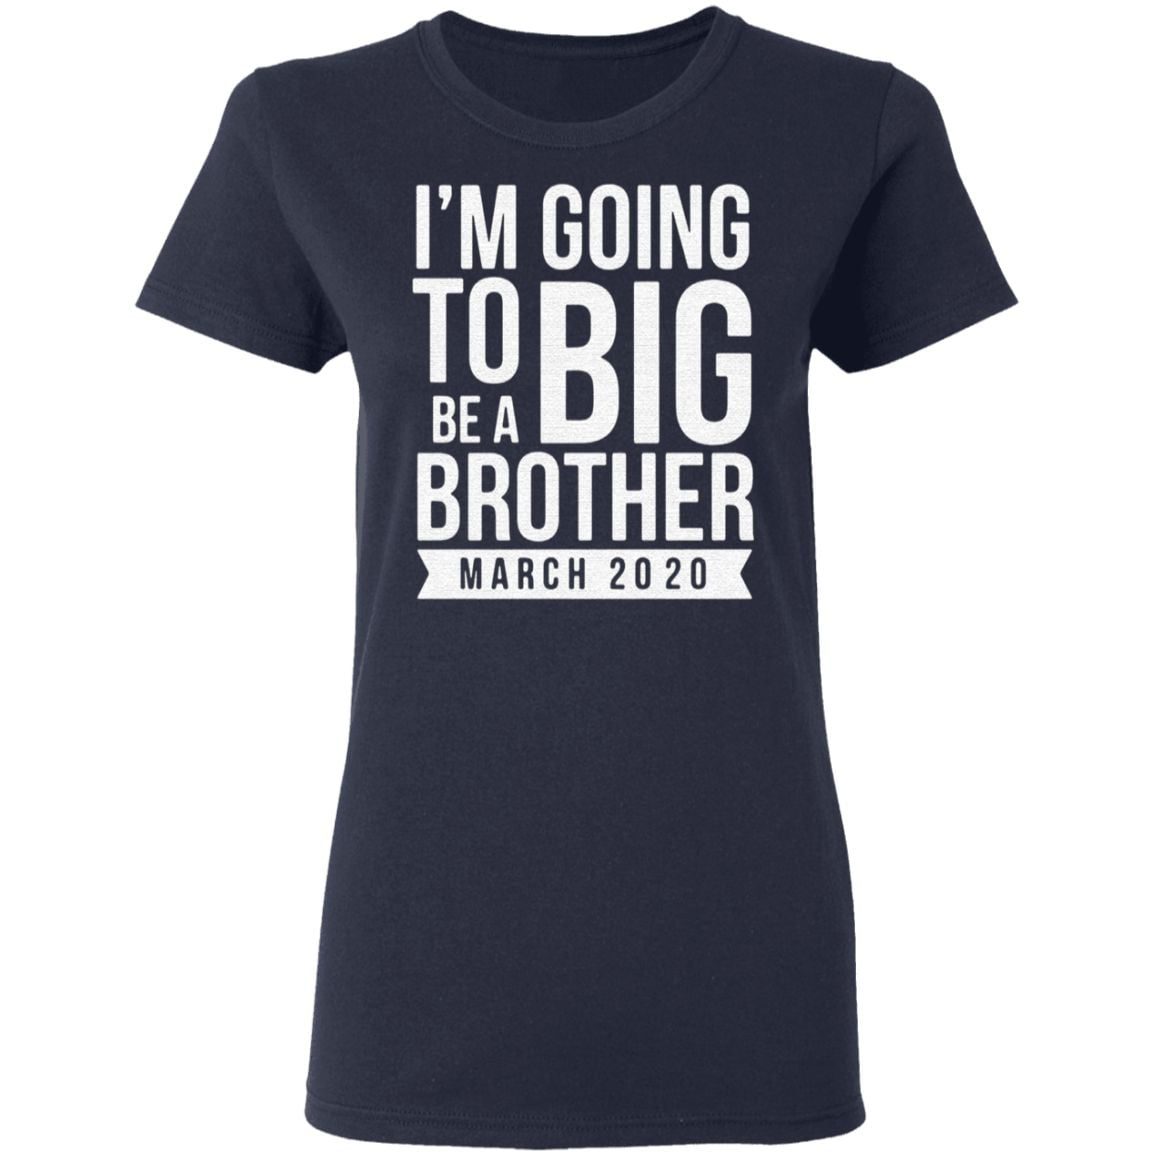 I’m going to be a big brother March 2020 TShirt